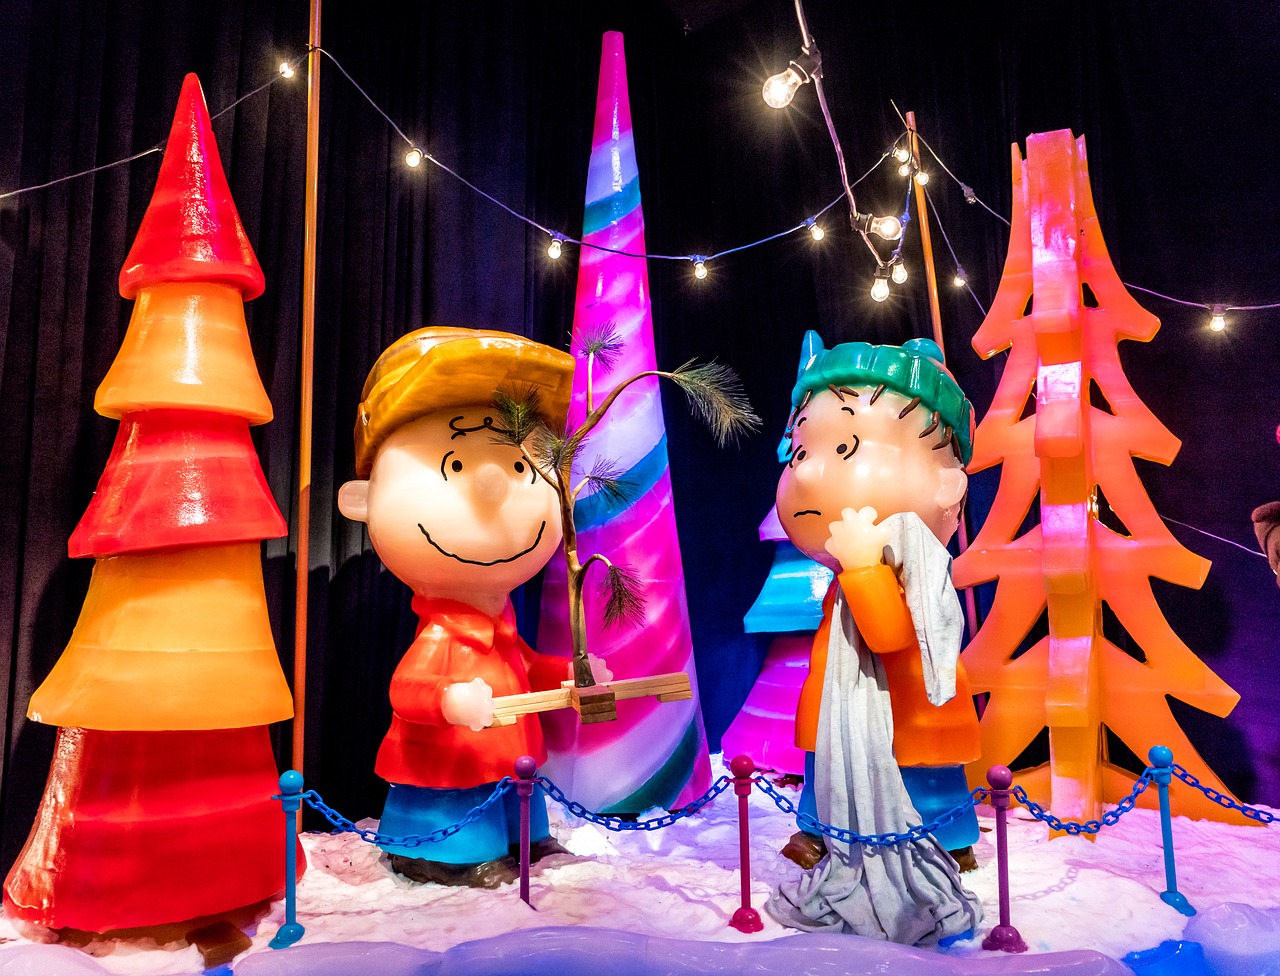 ice sculpture charlie brown christmas trees free photo